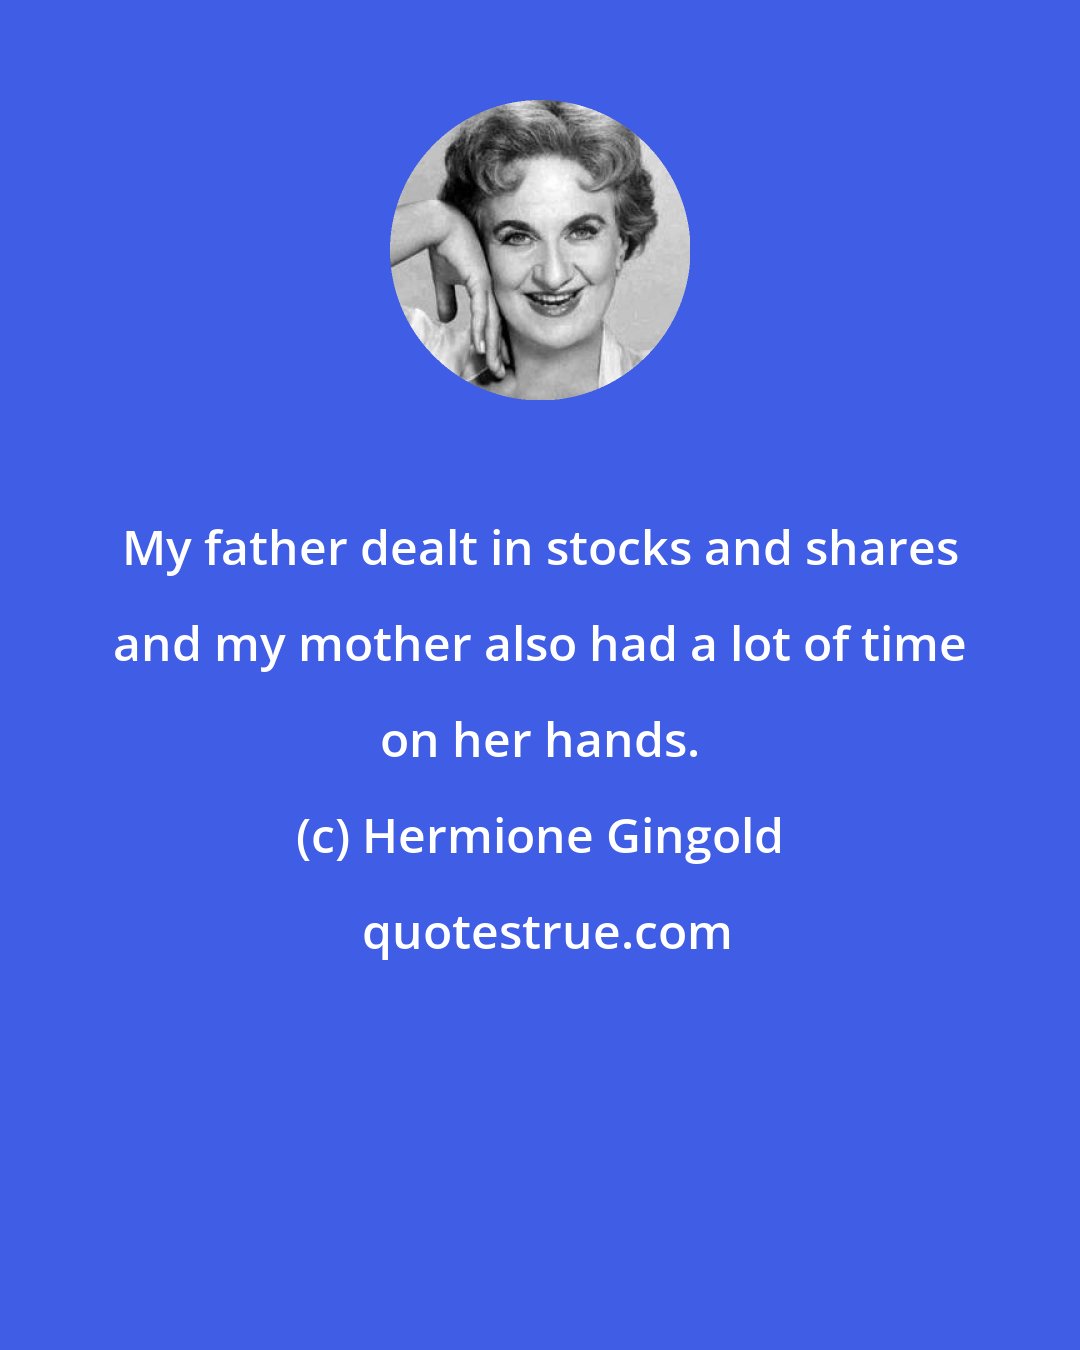 Hermione Gingold: My father dealt in stocks and shares and my mother also had a lot of time on her hands.